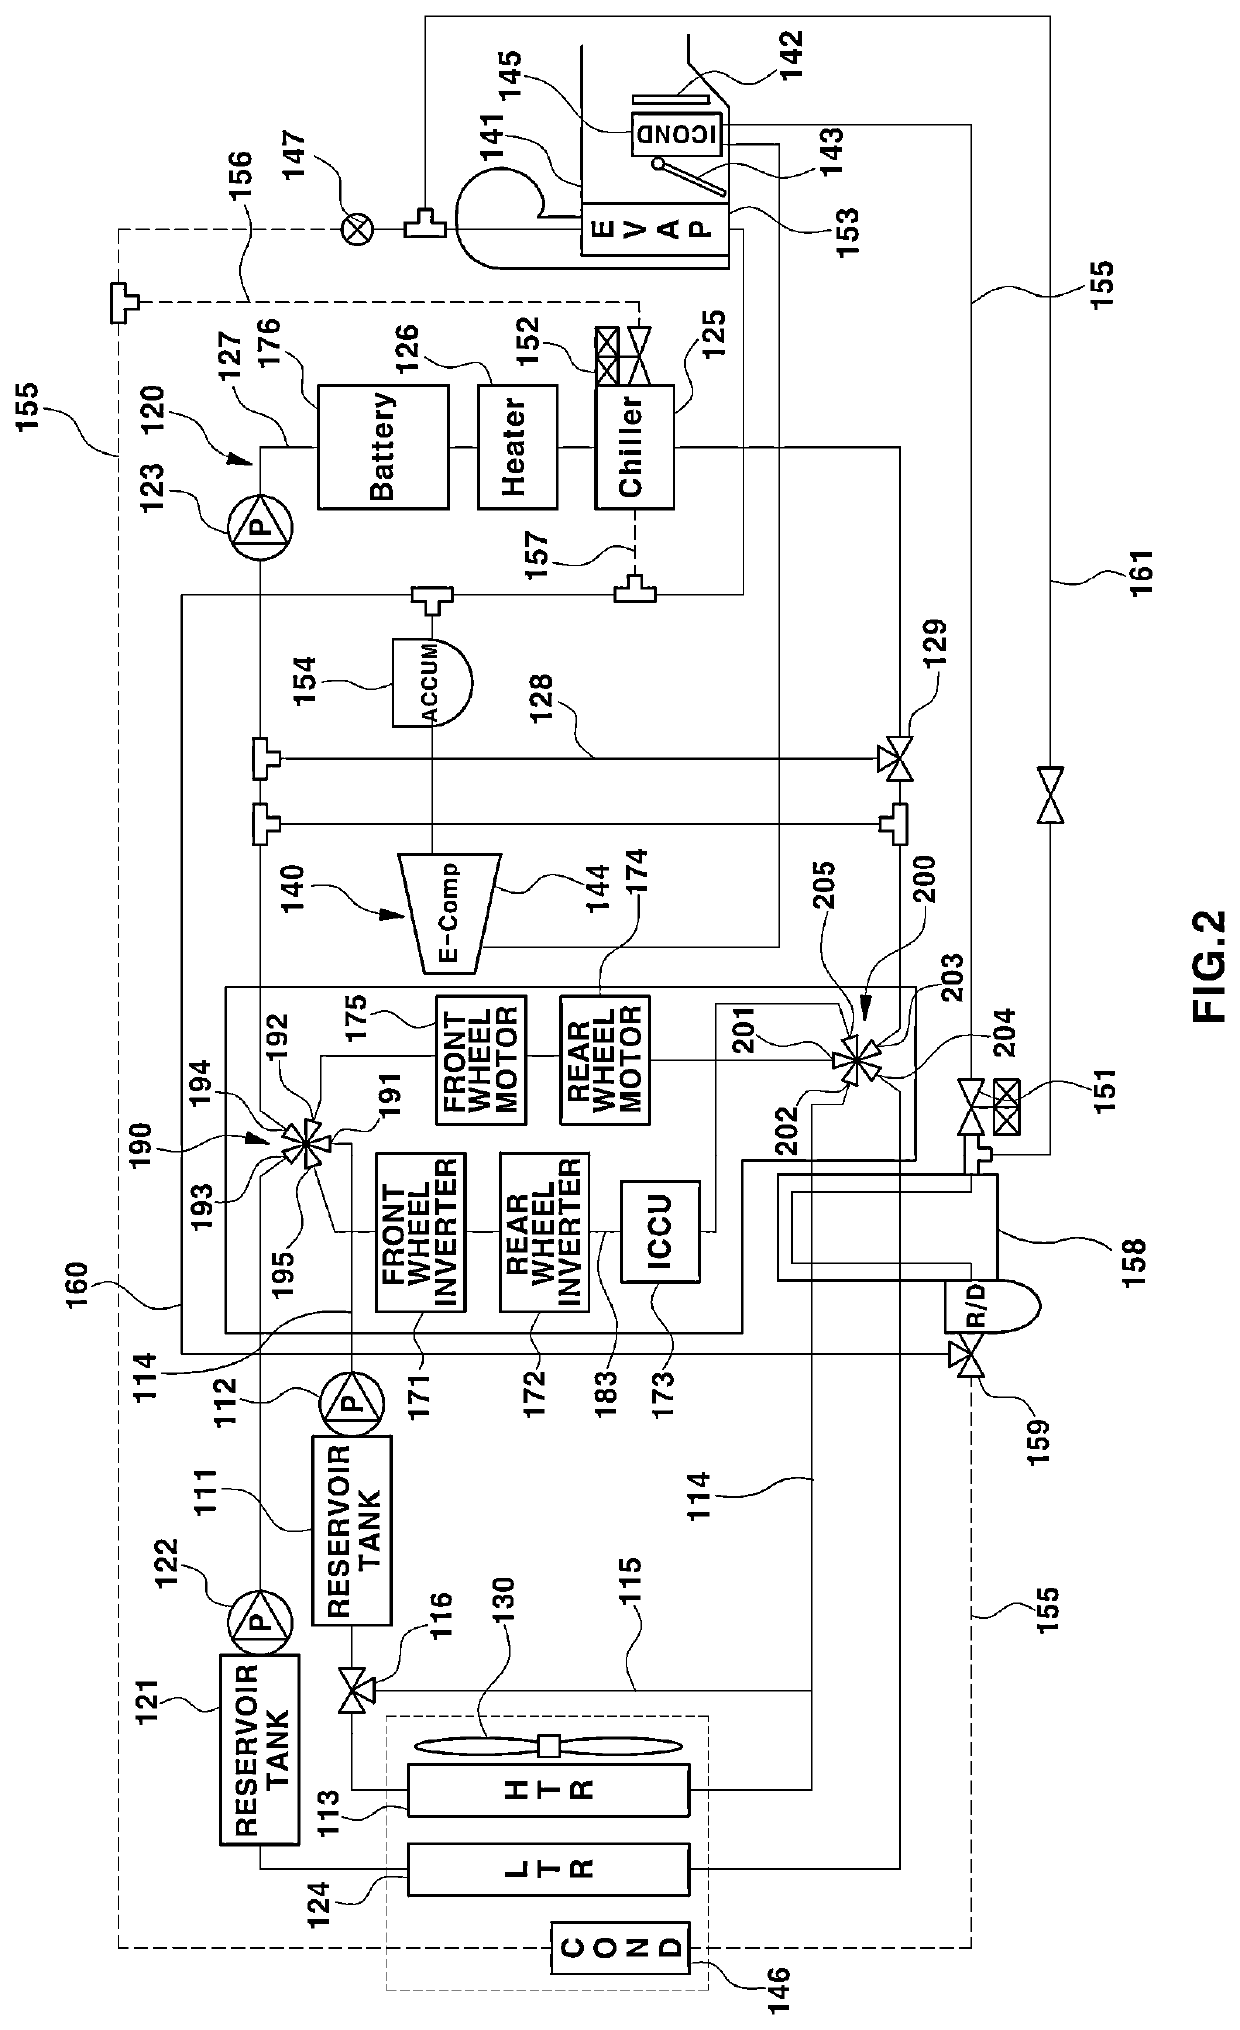 Thermal management system for electric vehicles